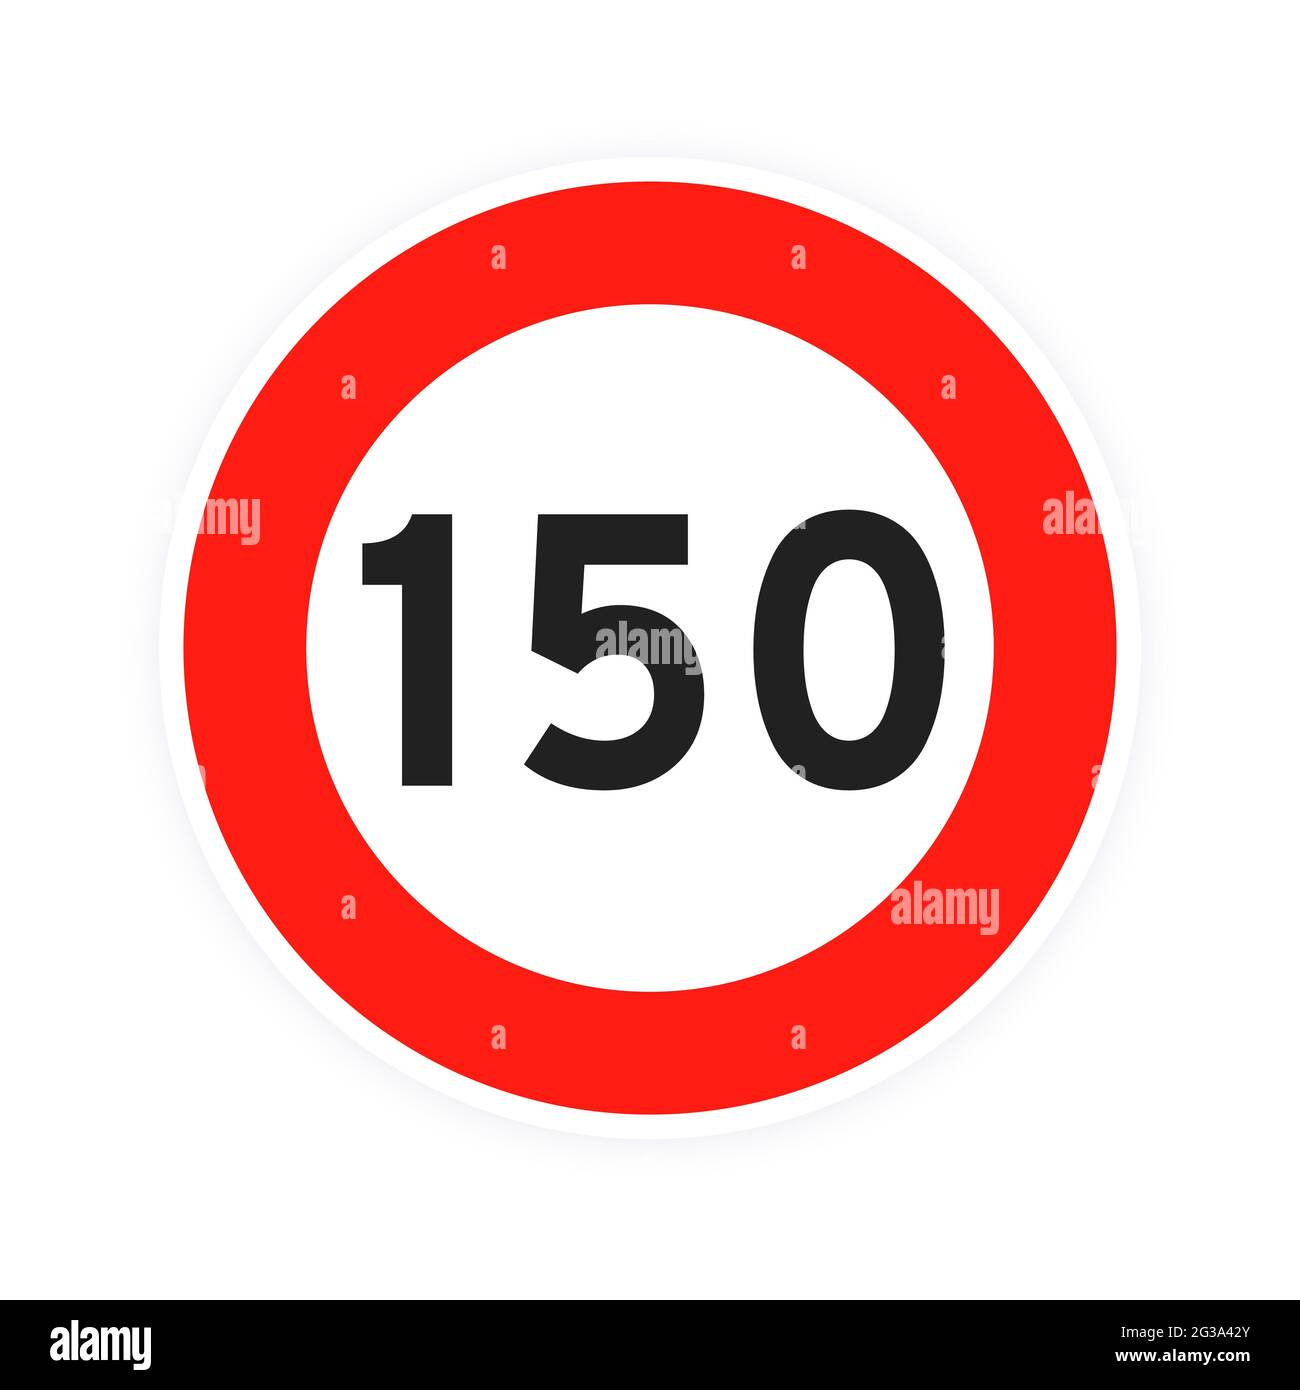 Speed limit 150 round road traffic icon sign flat style design vector illustration isolated on white background. Circle standard road sign with number Stock Vector